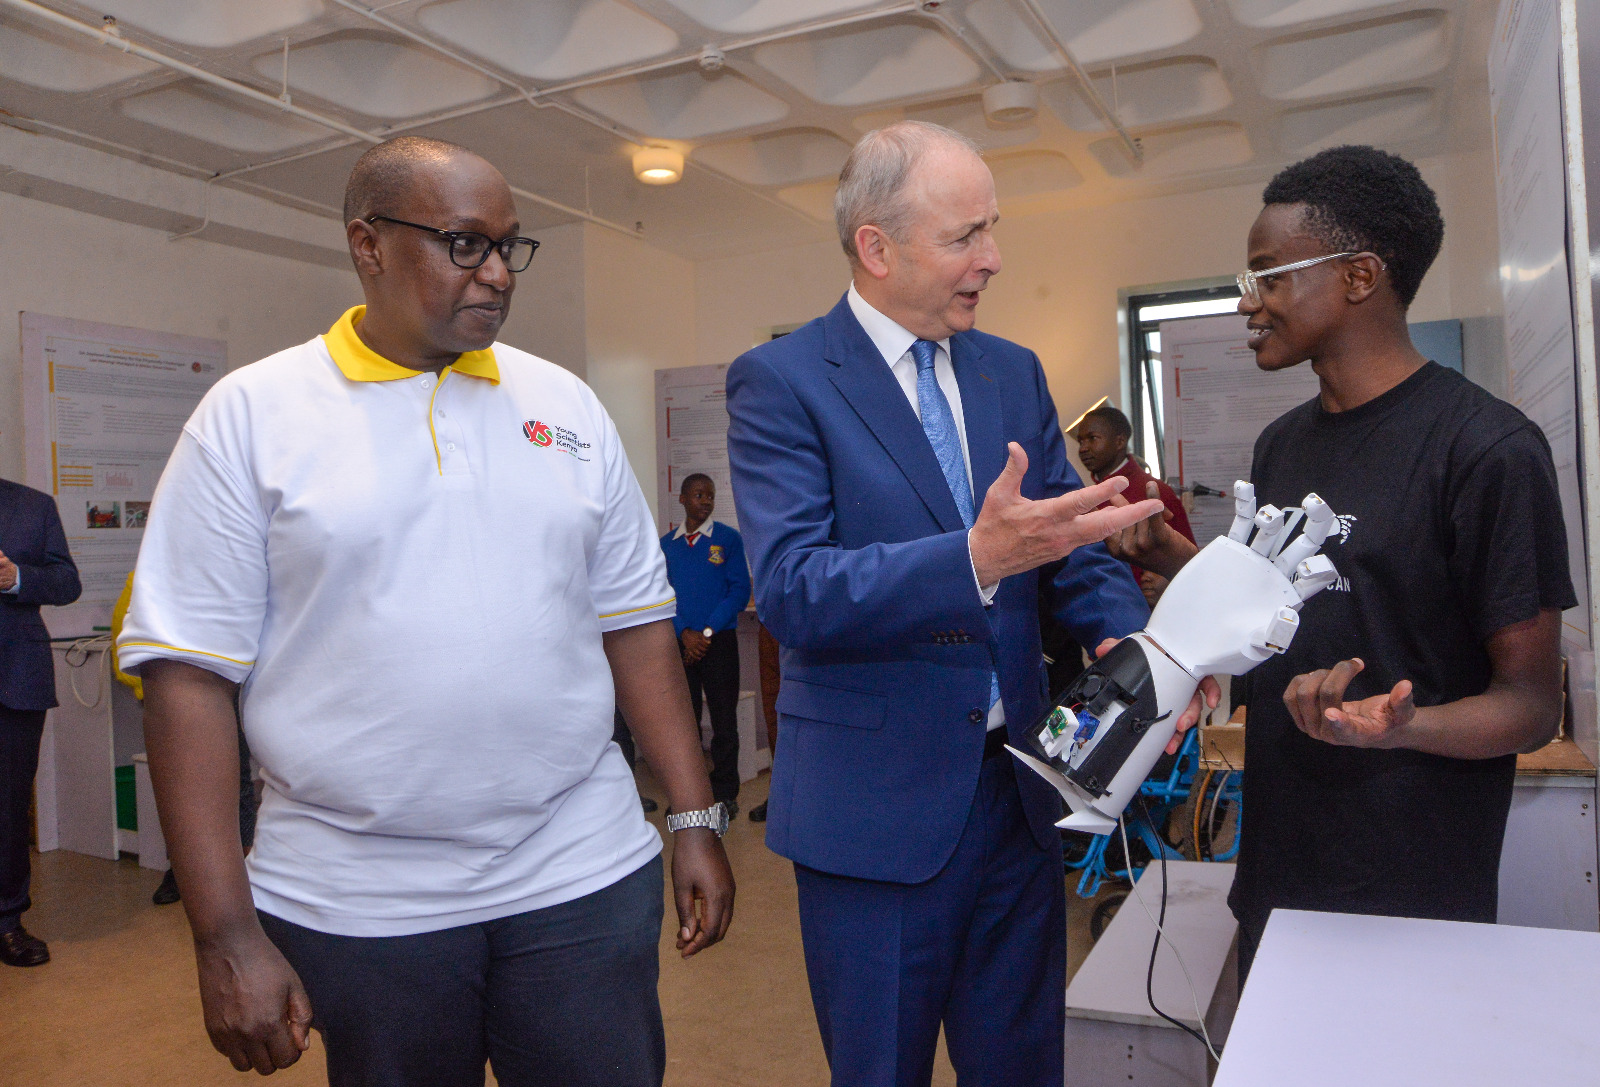 Caption: (L-R) National Director of young Scientist Kenya Dr Eng. Victor Mwongera, Irish Deputy Prime Minister and Minister for Foreign Affairs and Defence – Mr. Micheál Martin and Zerobionic Alumni YSK 2020 Maxwell Opondo